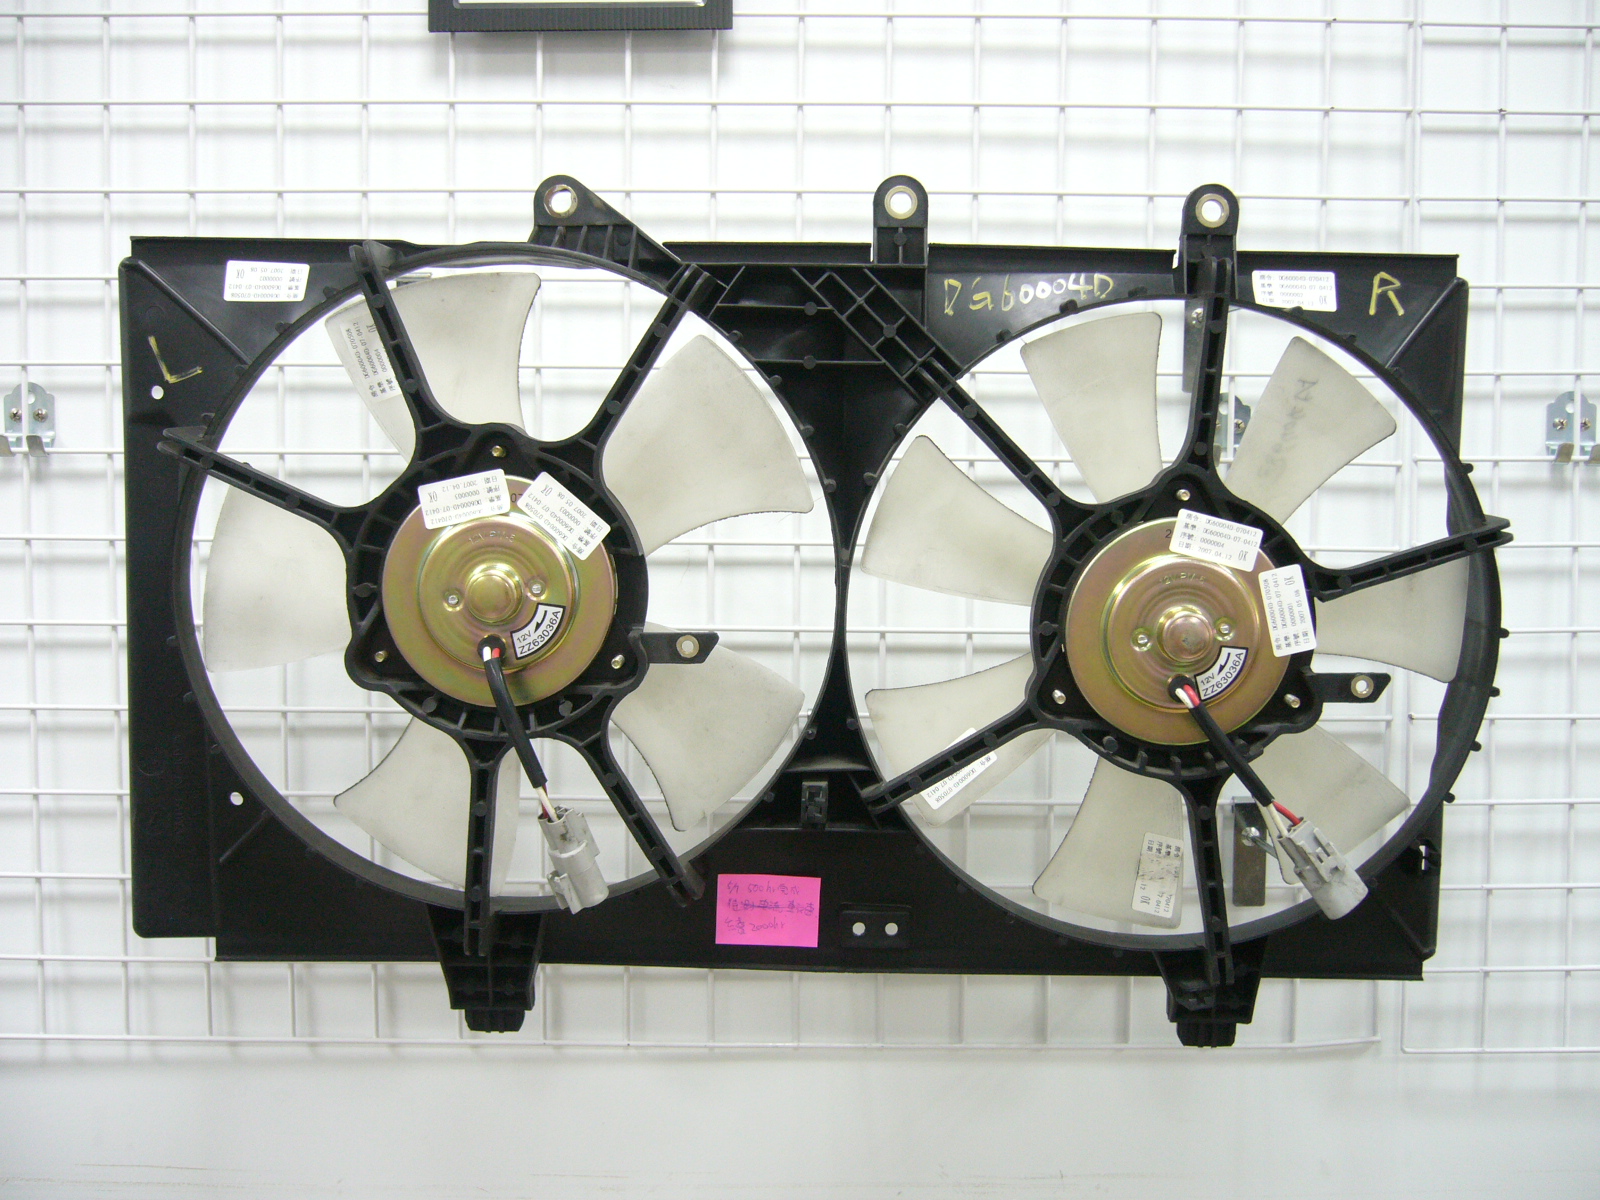 NEON 04-05 RAD&COND FAN Assembly (2 OLT)AUTO